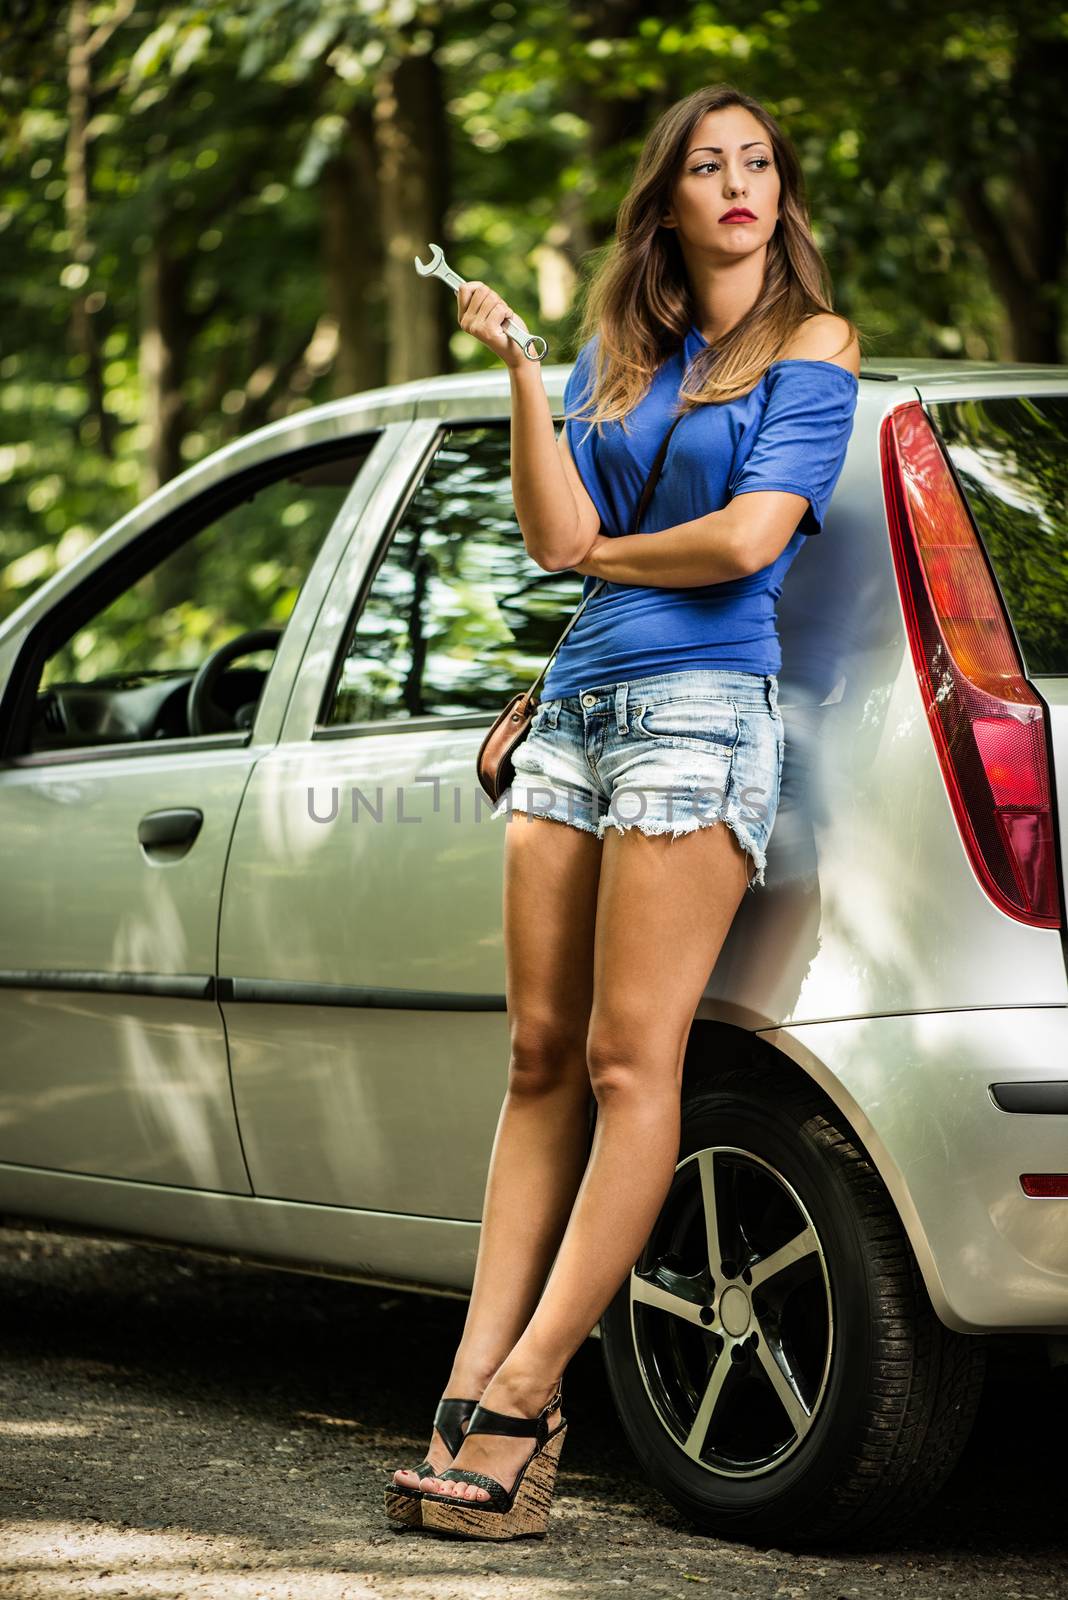 Beautiful young woman with a silver car that broke down on the road in forest. She has standing by a car and holding wrench.